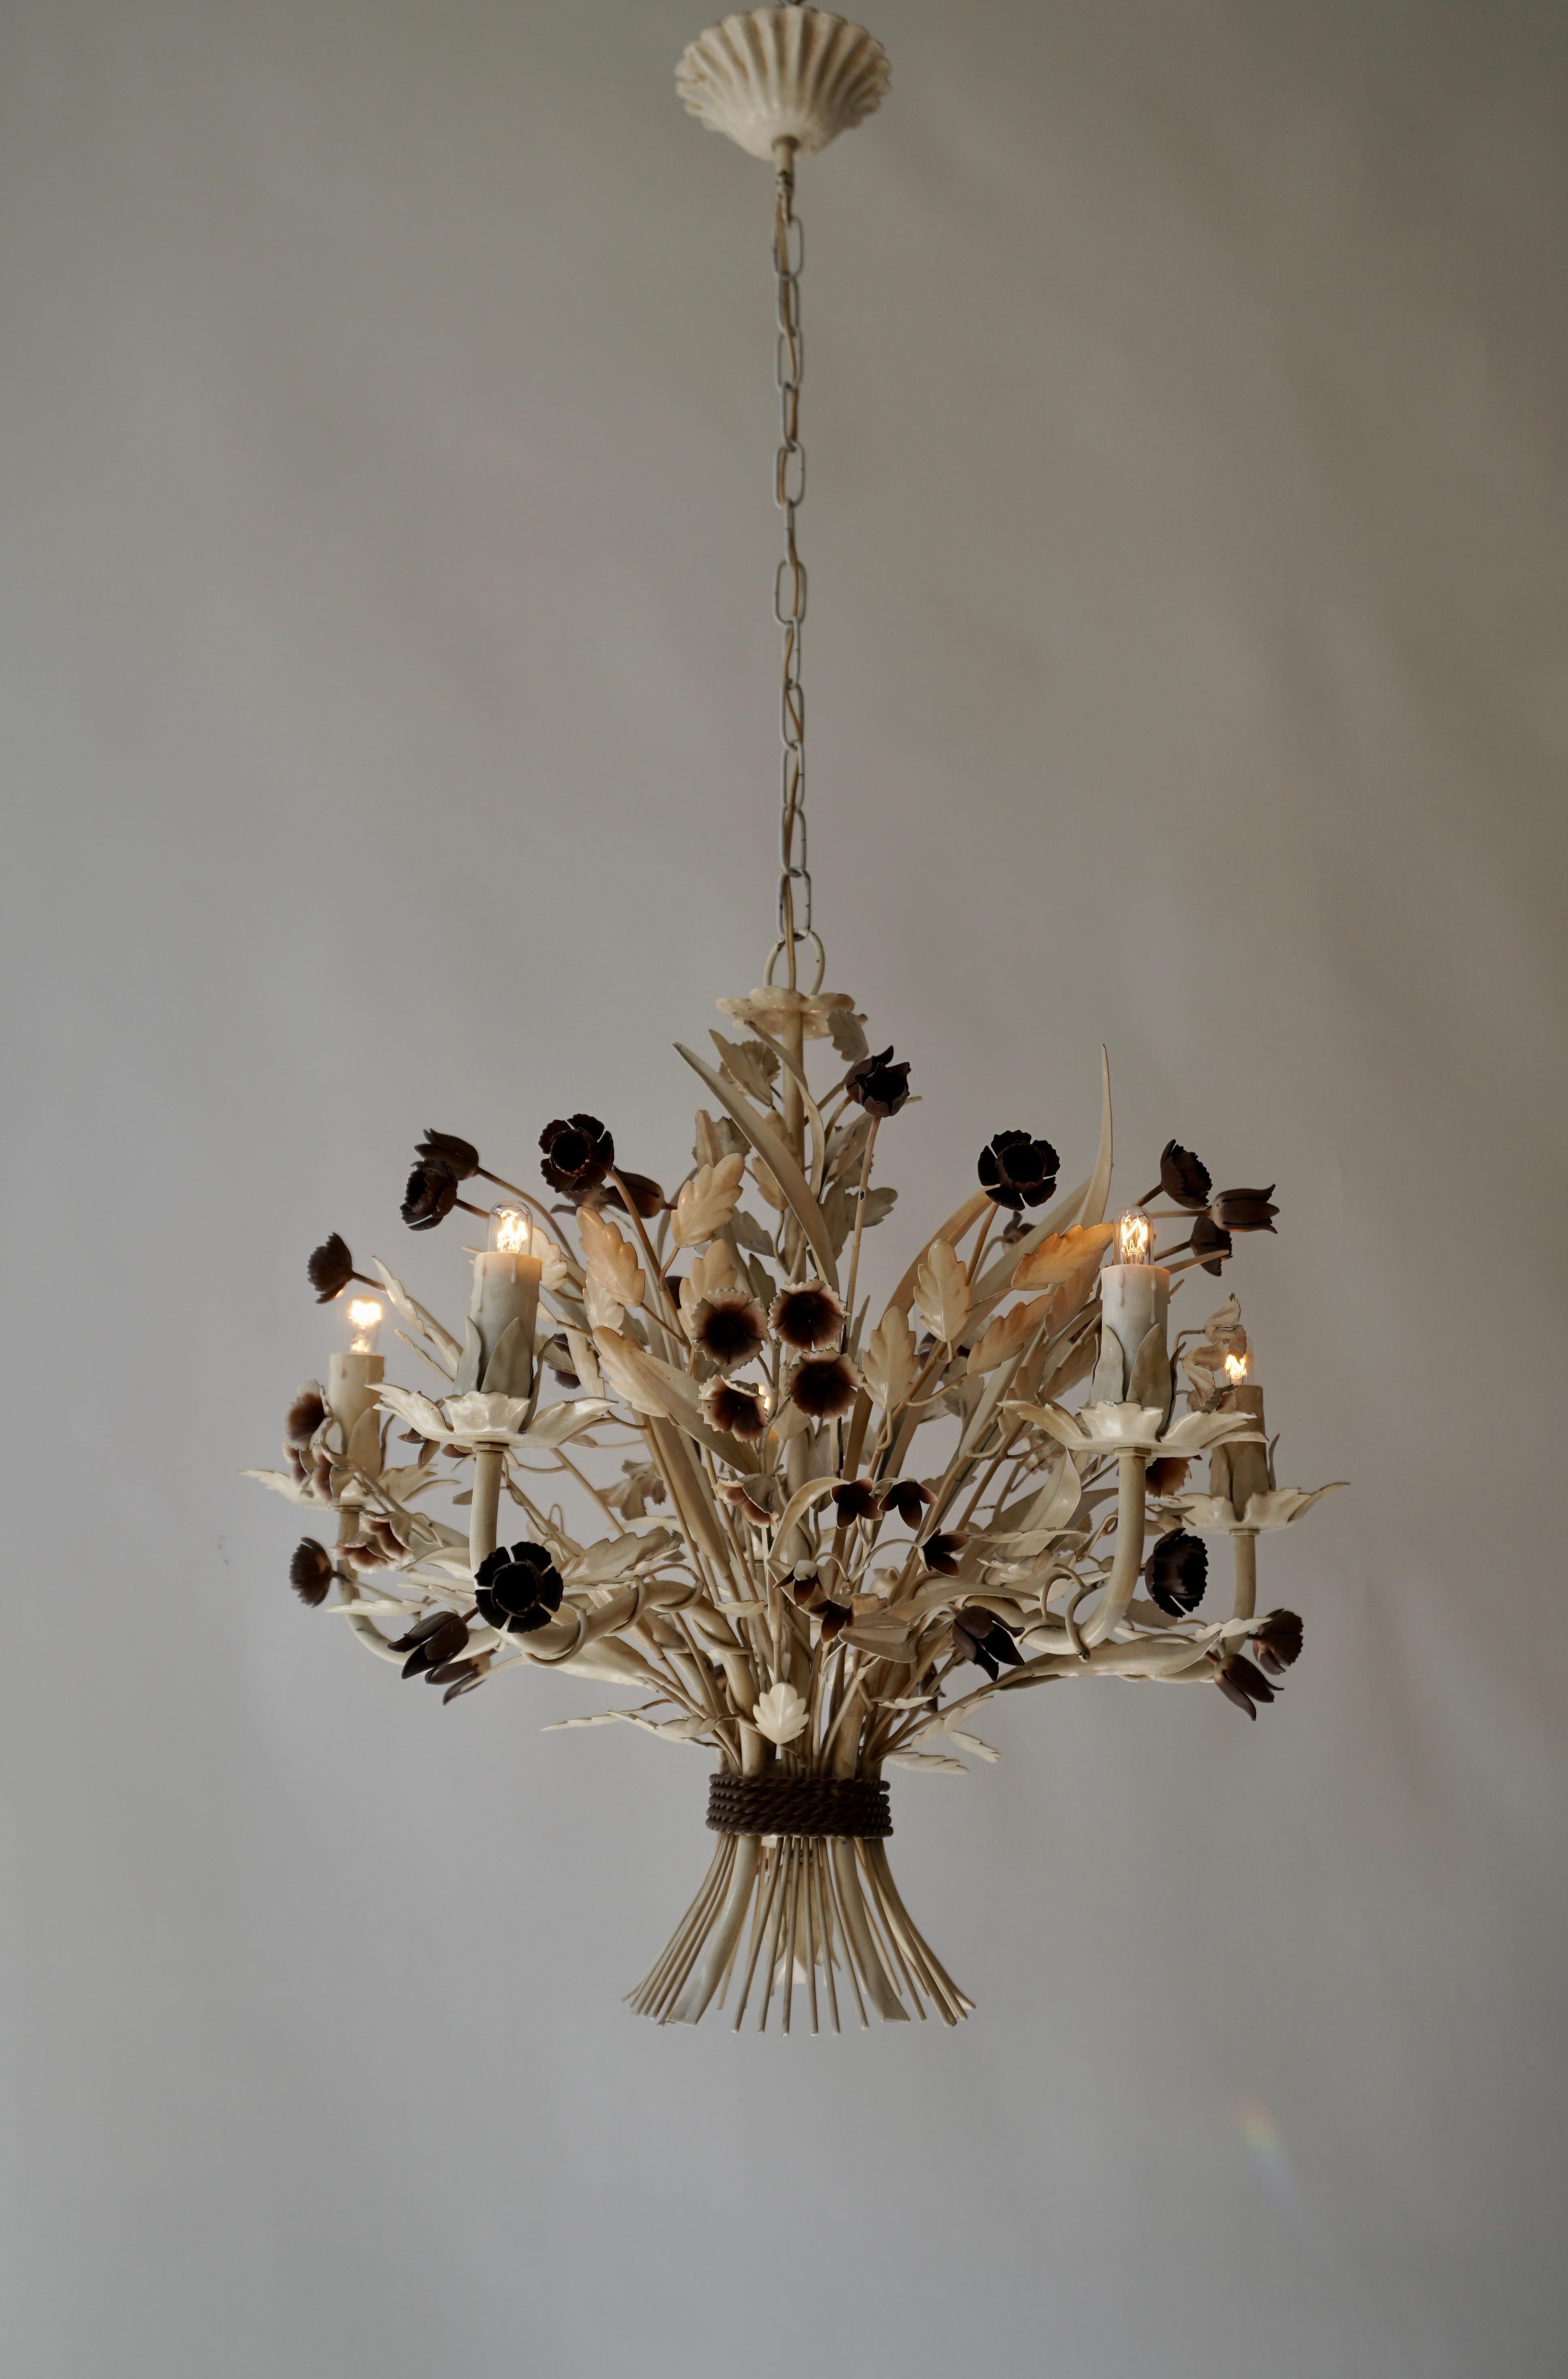 Charming 1950s painted iron Tole chandelier with many beautiful flowers in various beautiful brown and cream colors.

Diameter 21.6